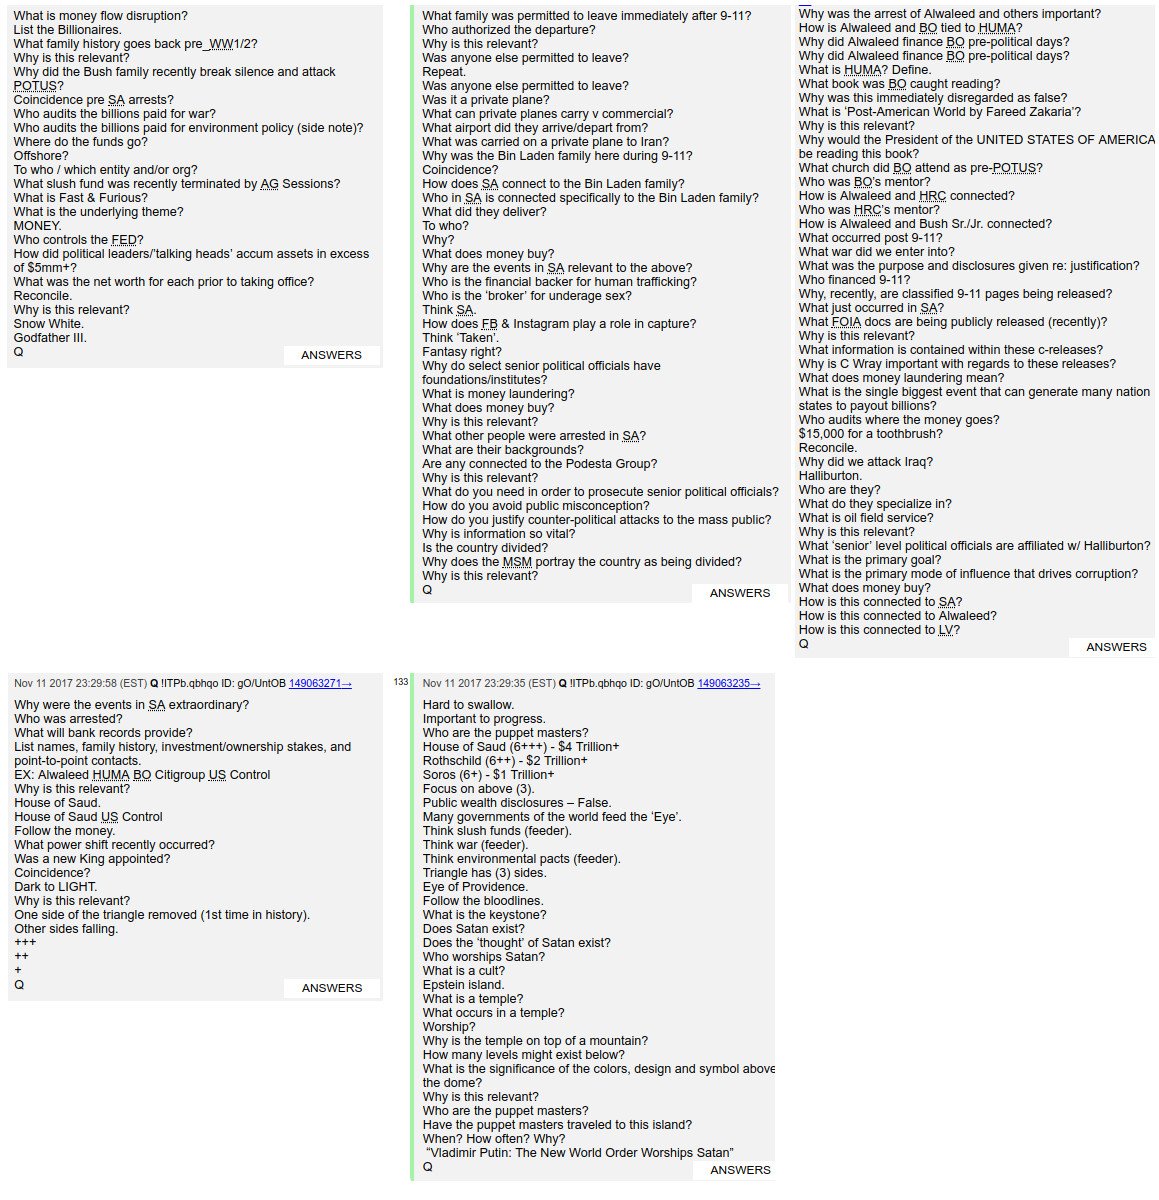 2/  #qanon beat it into our thick skulls on 4chan that the events of November 4 last year were incredibly significant for all sorts of reasons. Here's a sample of his drops from the time. If you want to know how the world worked, read these.